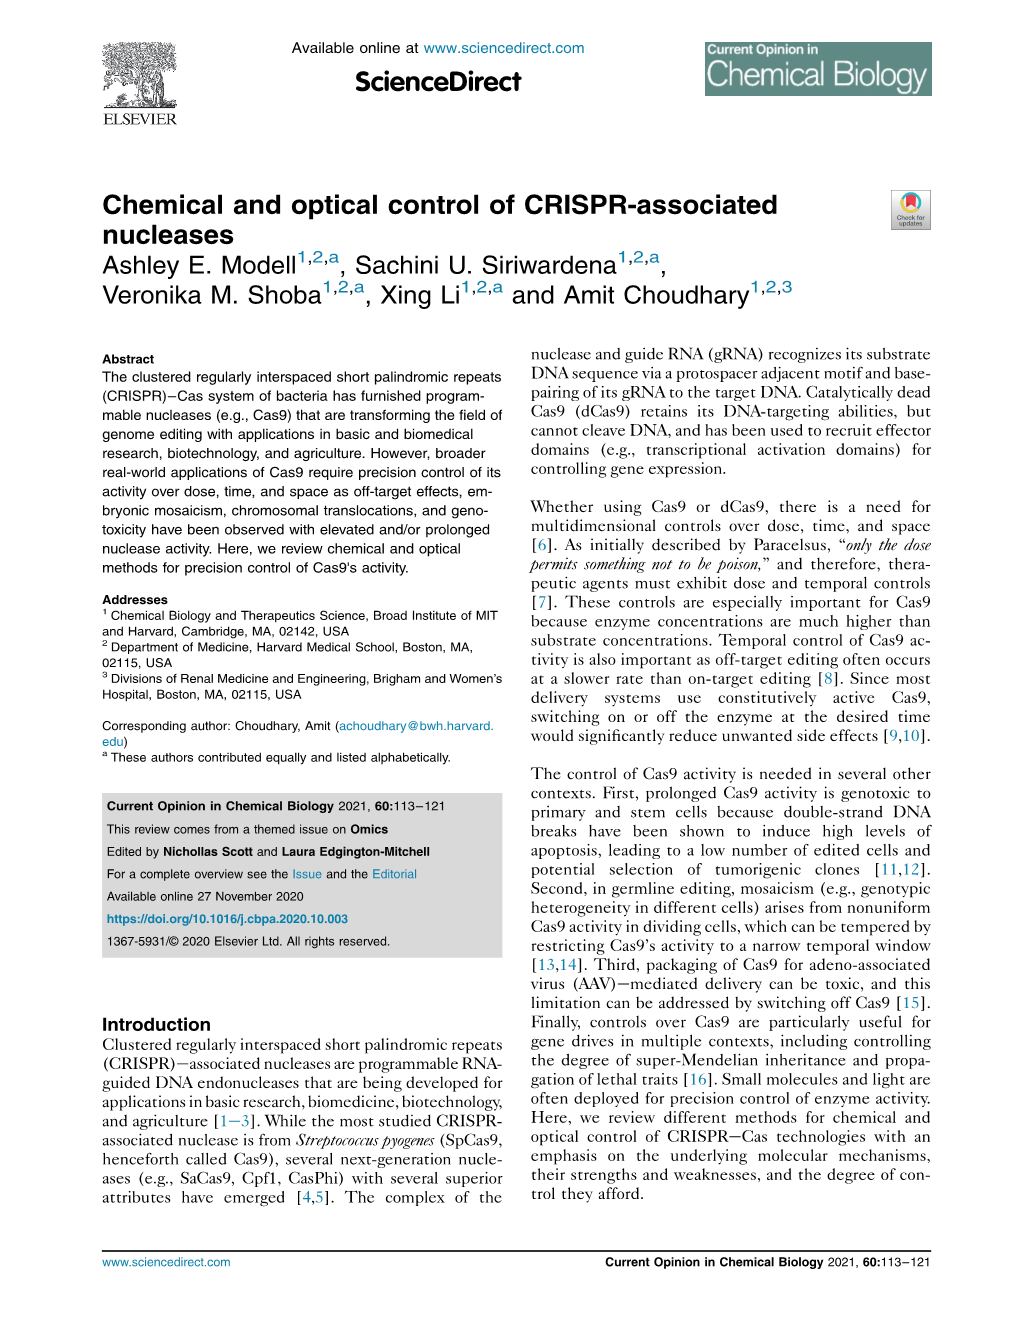 Chemical and Optical Control of CRISPR-Associated Nucleases Ashley E